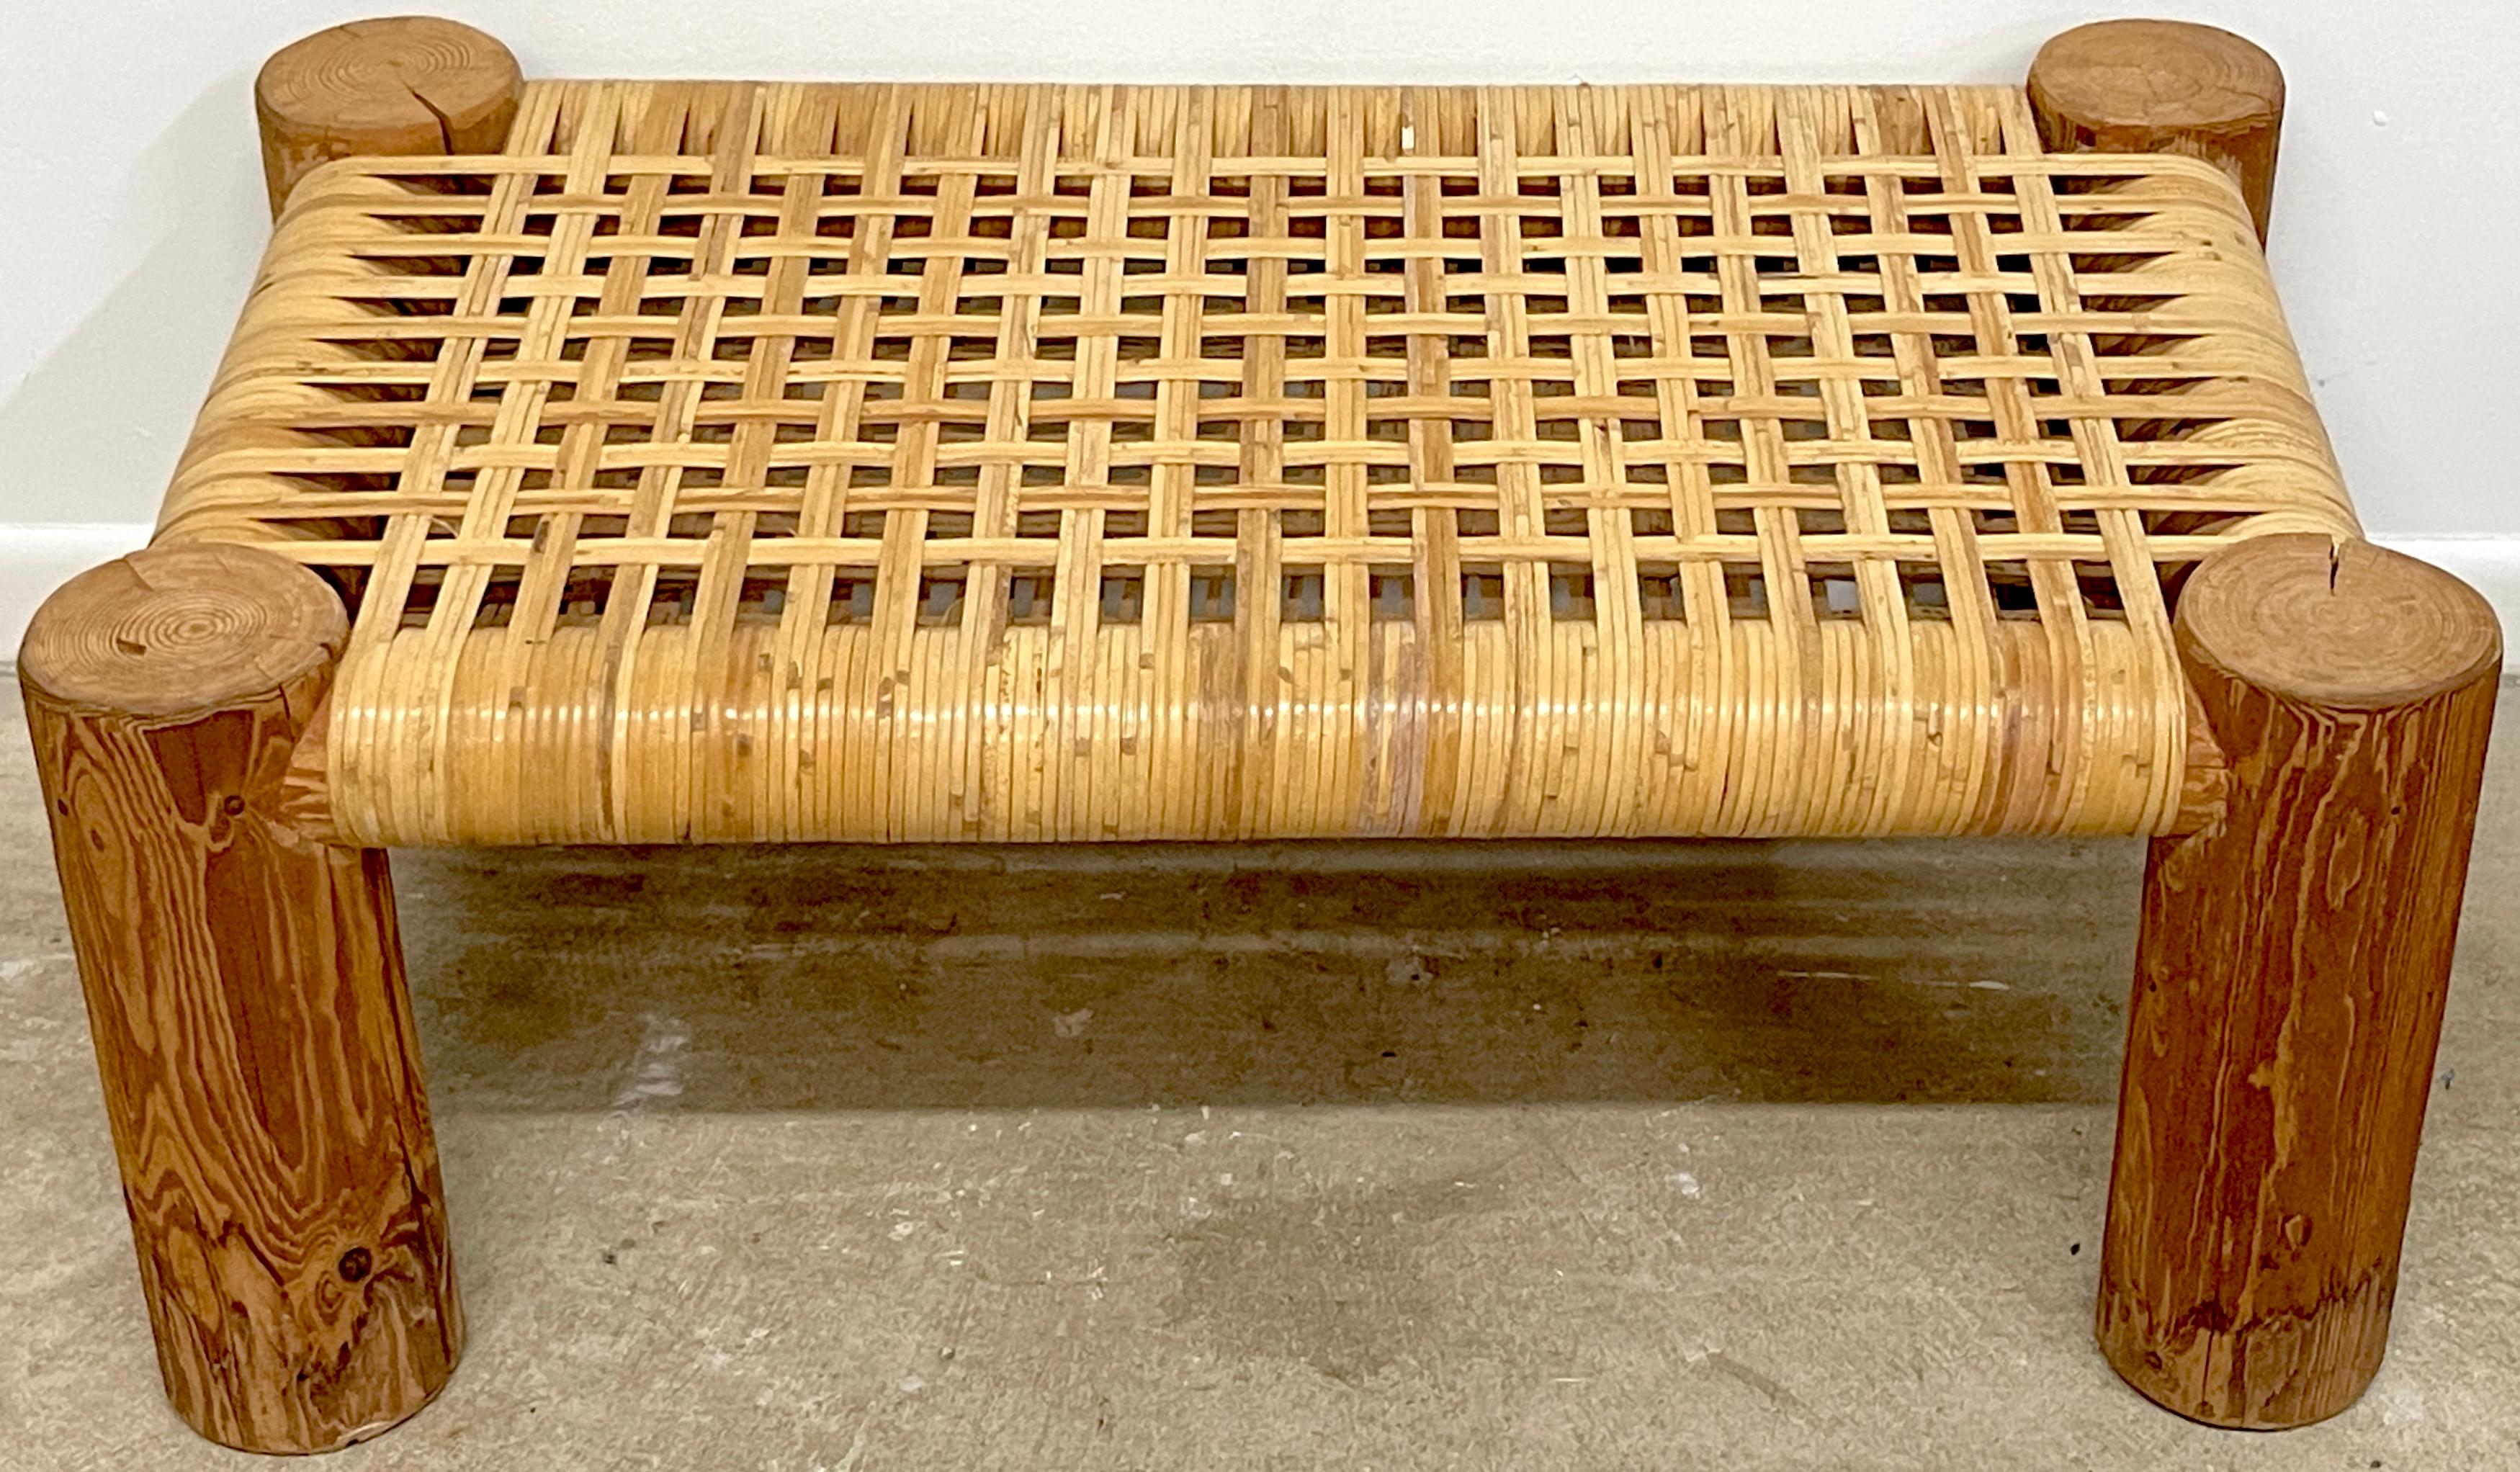 Organic Modern 'Dowelwood' Woven Rattan Bench 
USA, circa 1980s

A quietly bold Organic Modern 'Dowelwood' Woven Rattan Bench, crafted in the USA circa 1980s, exudes natural allure and timeless appeal. This bench features a sleek rectangular form,